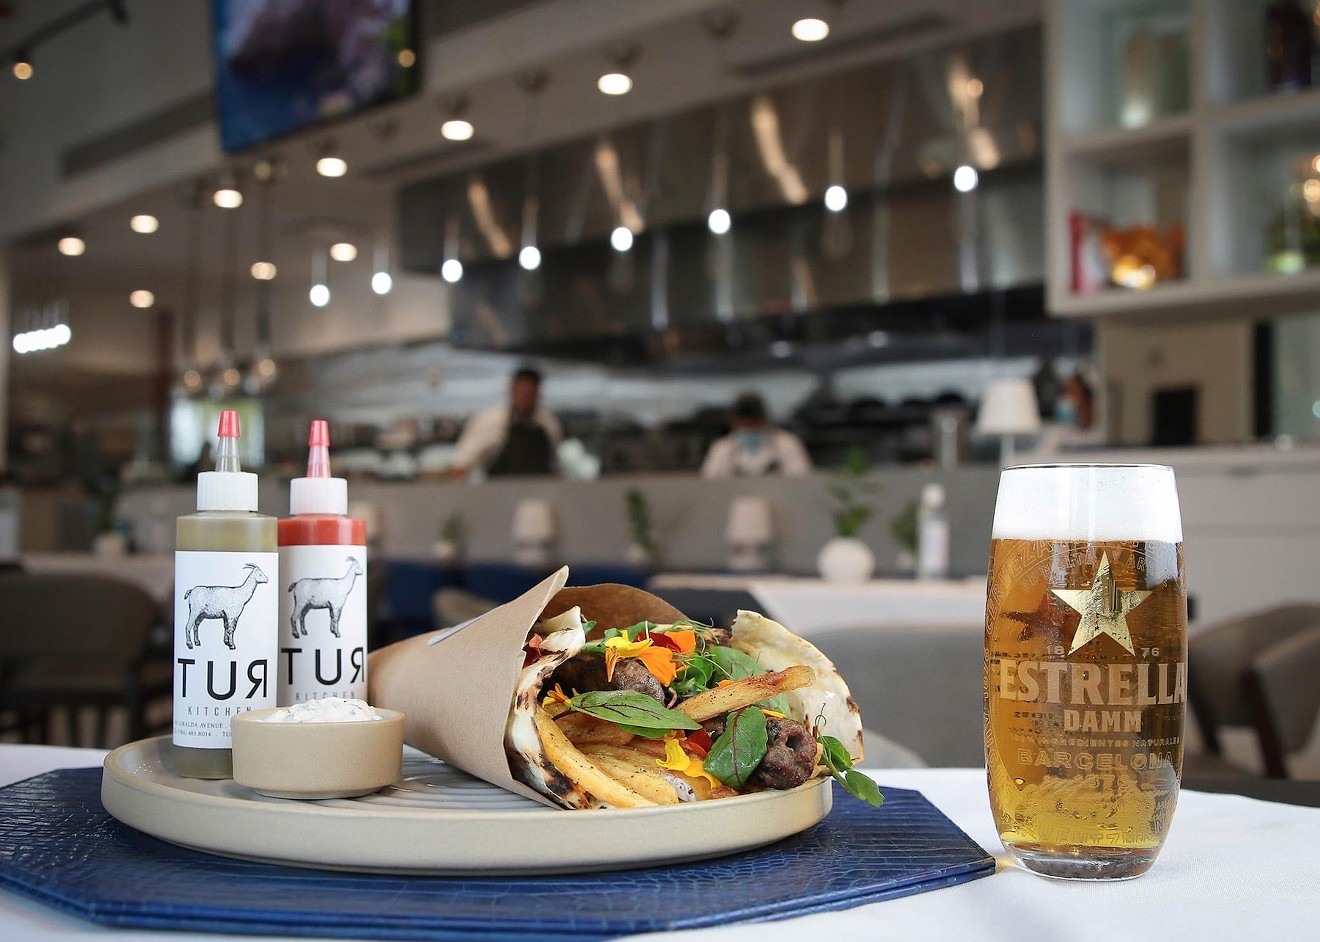 Tur Kitchen's pairing features an Estrella Damm beer served with the Damm Burger for $25.